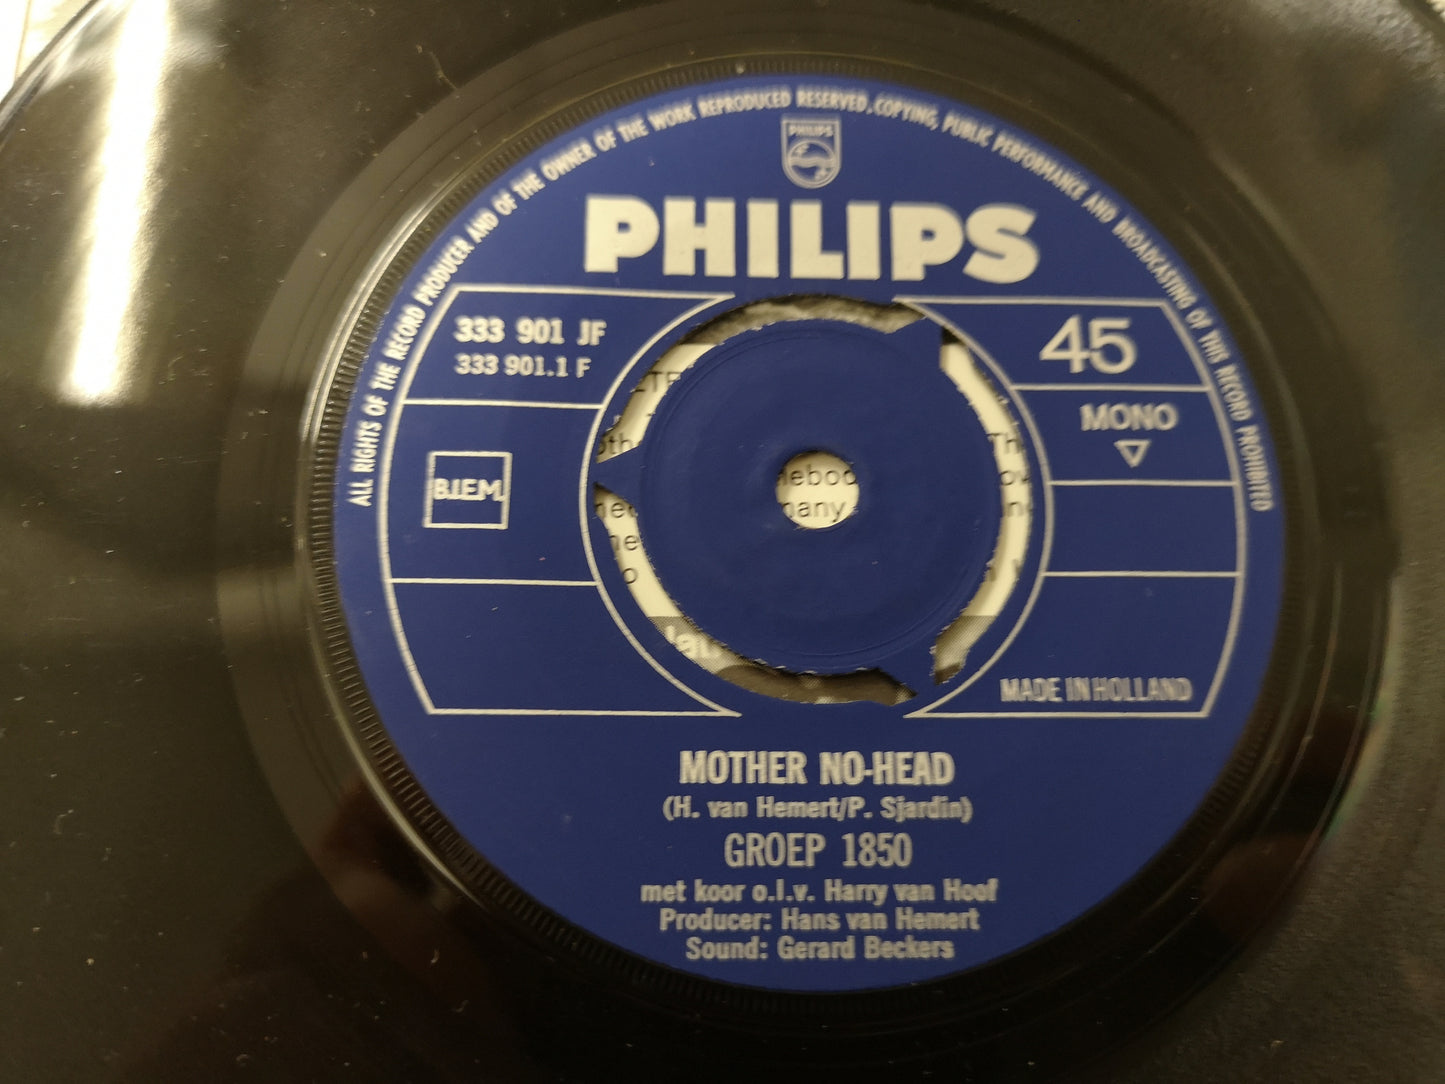 Group 1850 "Mother No-Head" Orig Holland 1967 VG++/M- (7" Single)